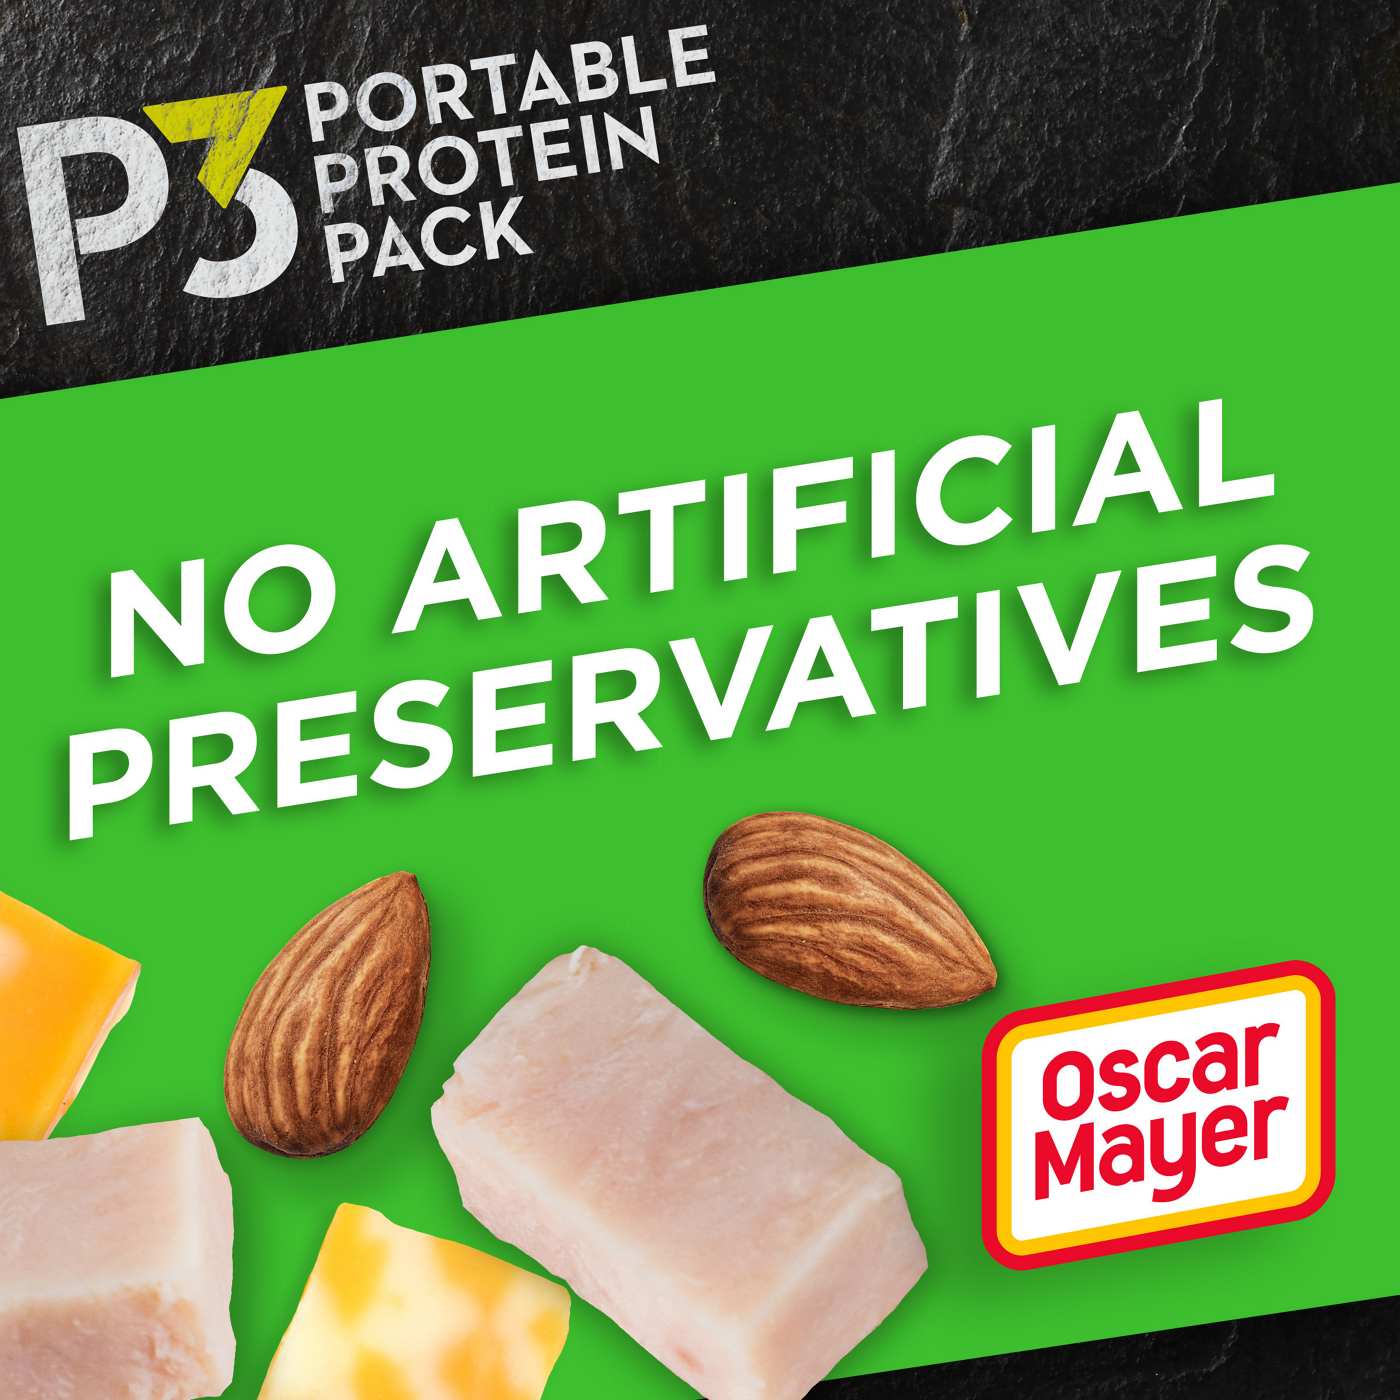 P3 Portable Protein Pack Snack Tray - Turkey, Almonds & Colby Jack; image 2 of 4